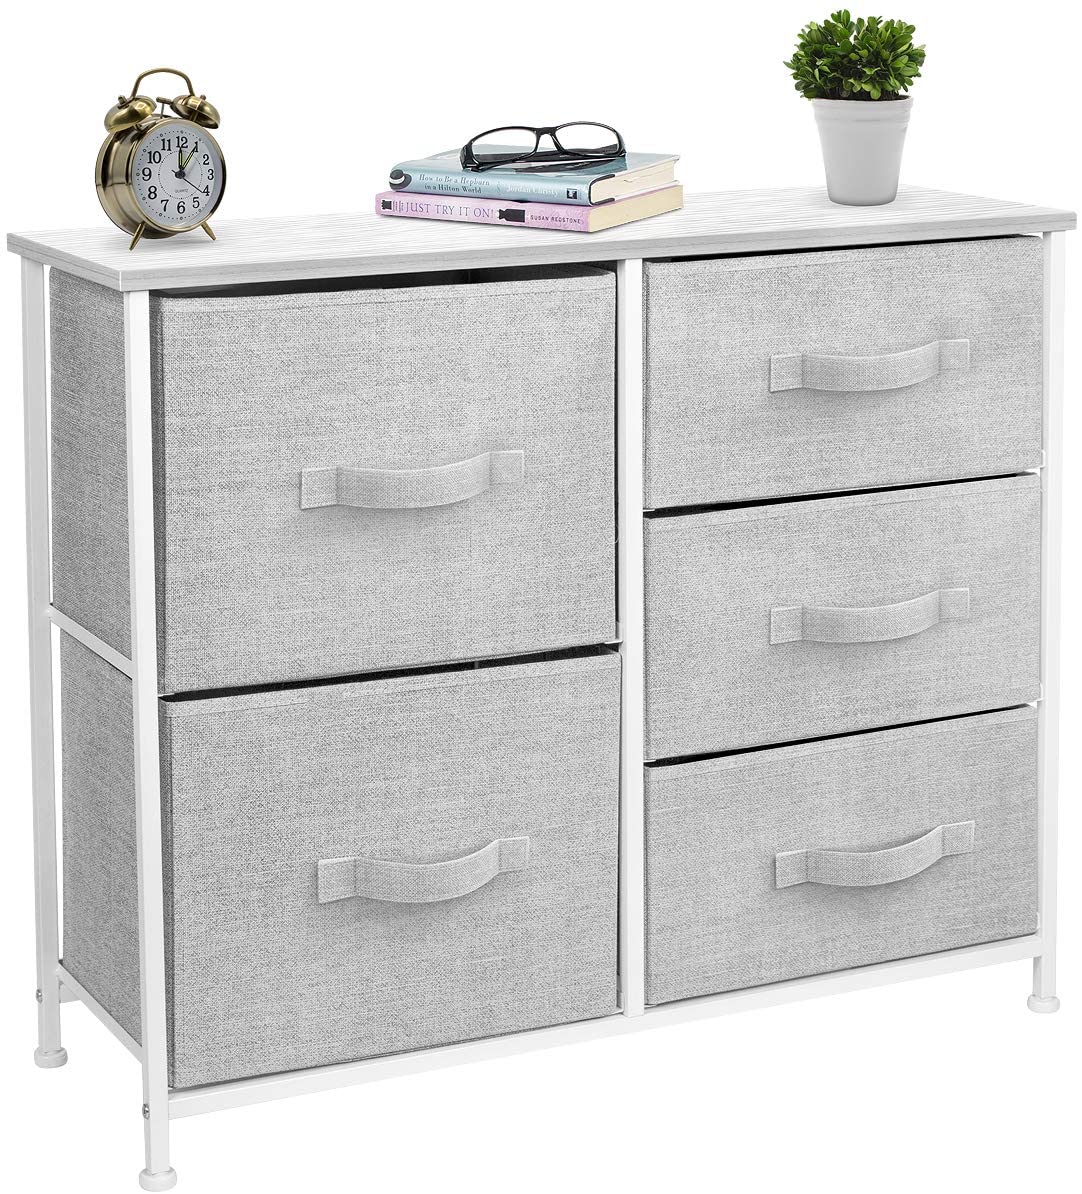 Sorbus Dresser with 5 Drawers - Furniture Storage Tower Unit for Bedroom, Hallway, Closet, Office Organization - Steel Frame, Wood Top, Easy Pull Fabric Bins (White/Gray)